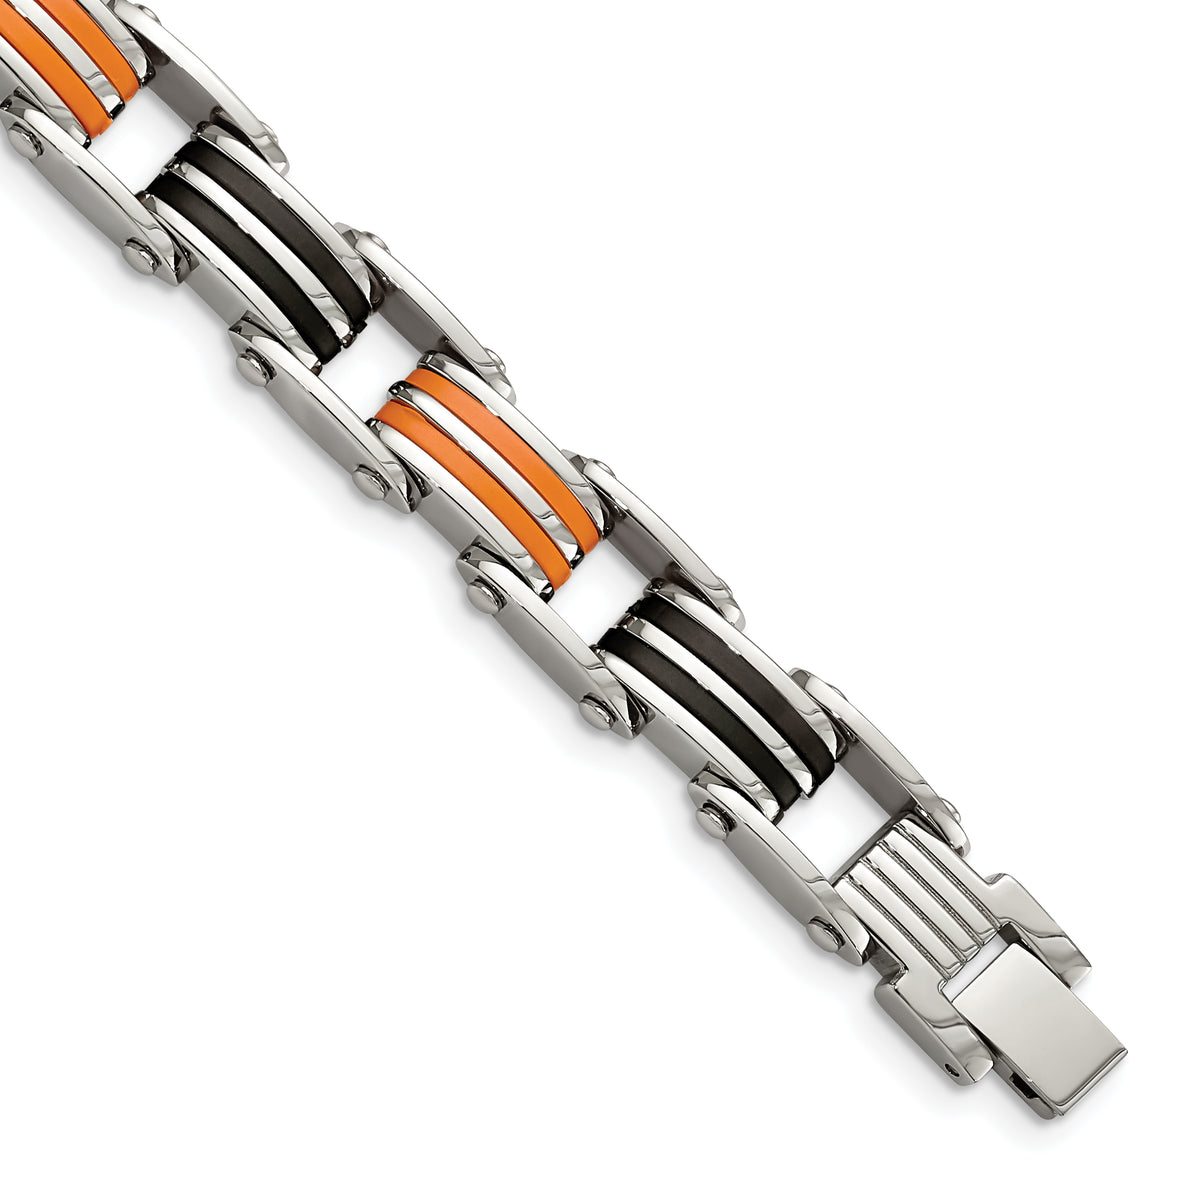 Chisel Stainless Steel Polished with Black and Orange Rubber 8.5 inch Link Bracelet